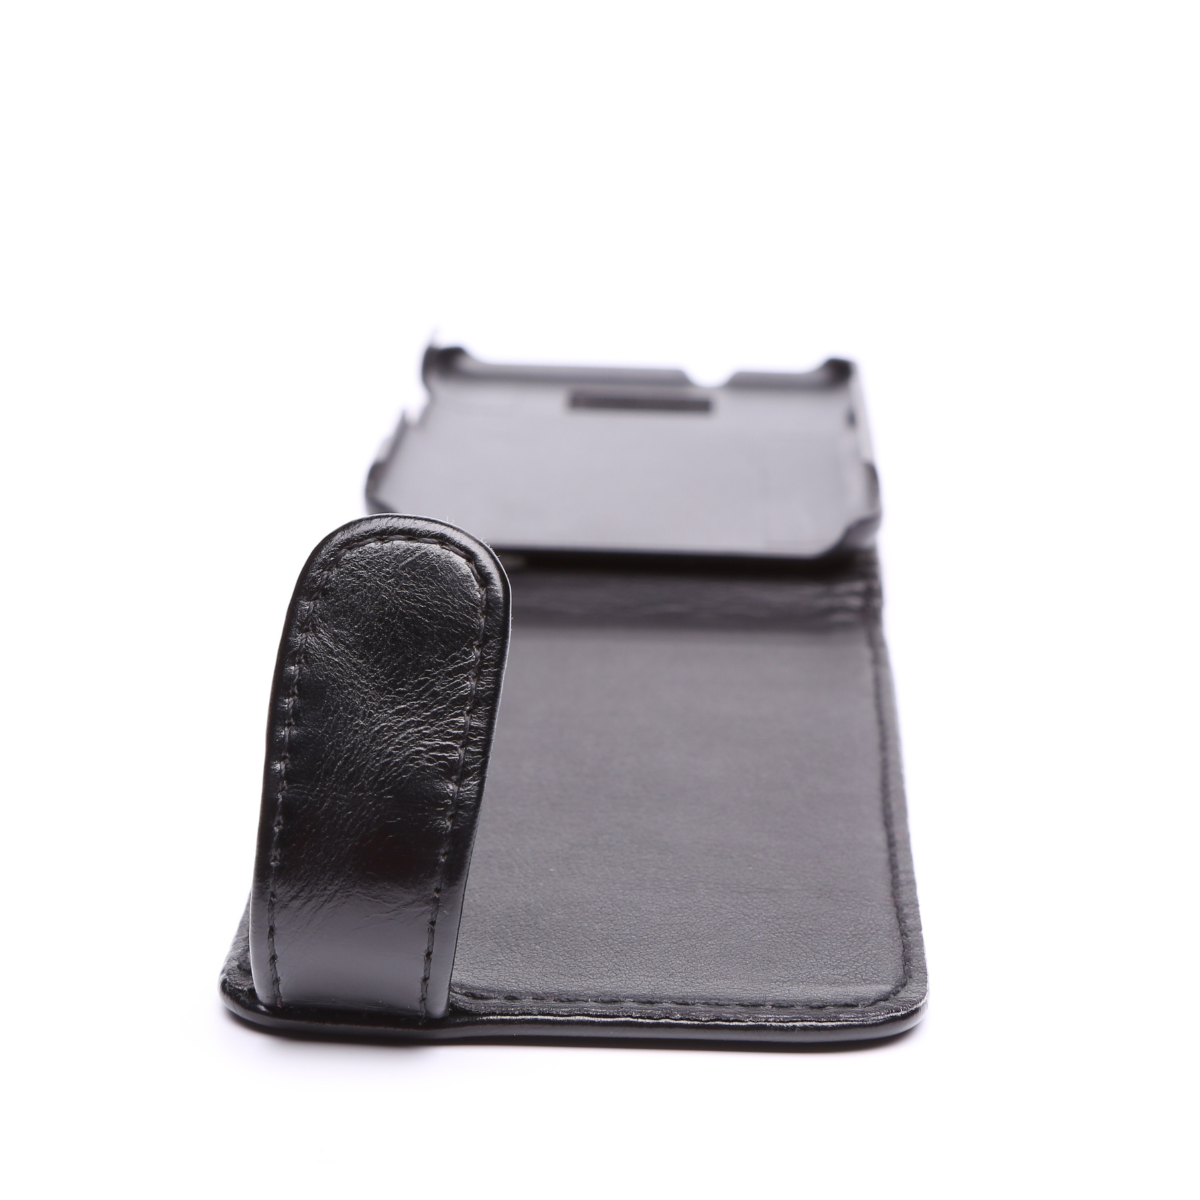 15. Timeless Elegance: Personalized Leather Phone Case, the Perfect 3rd Anniversary Gift for Him